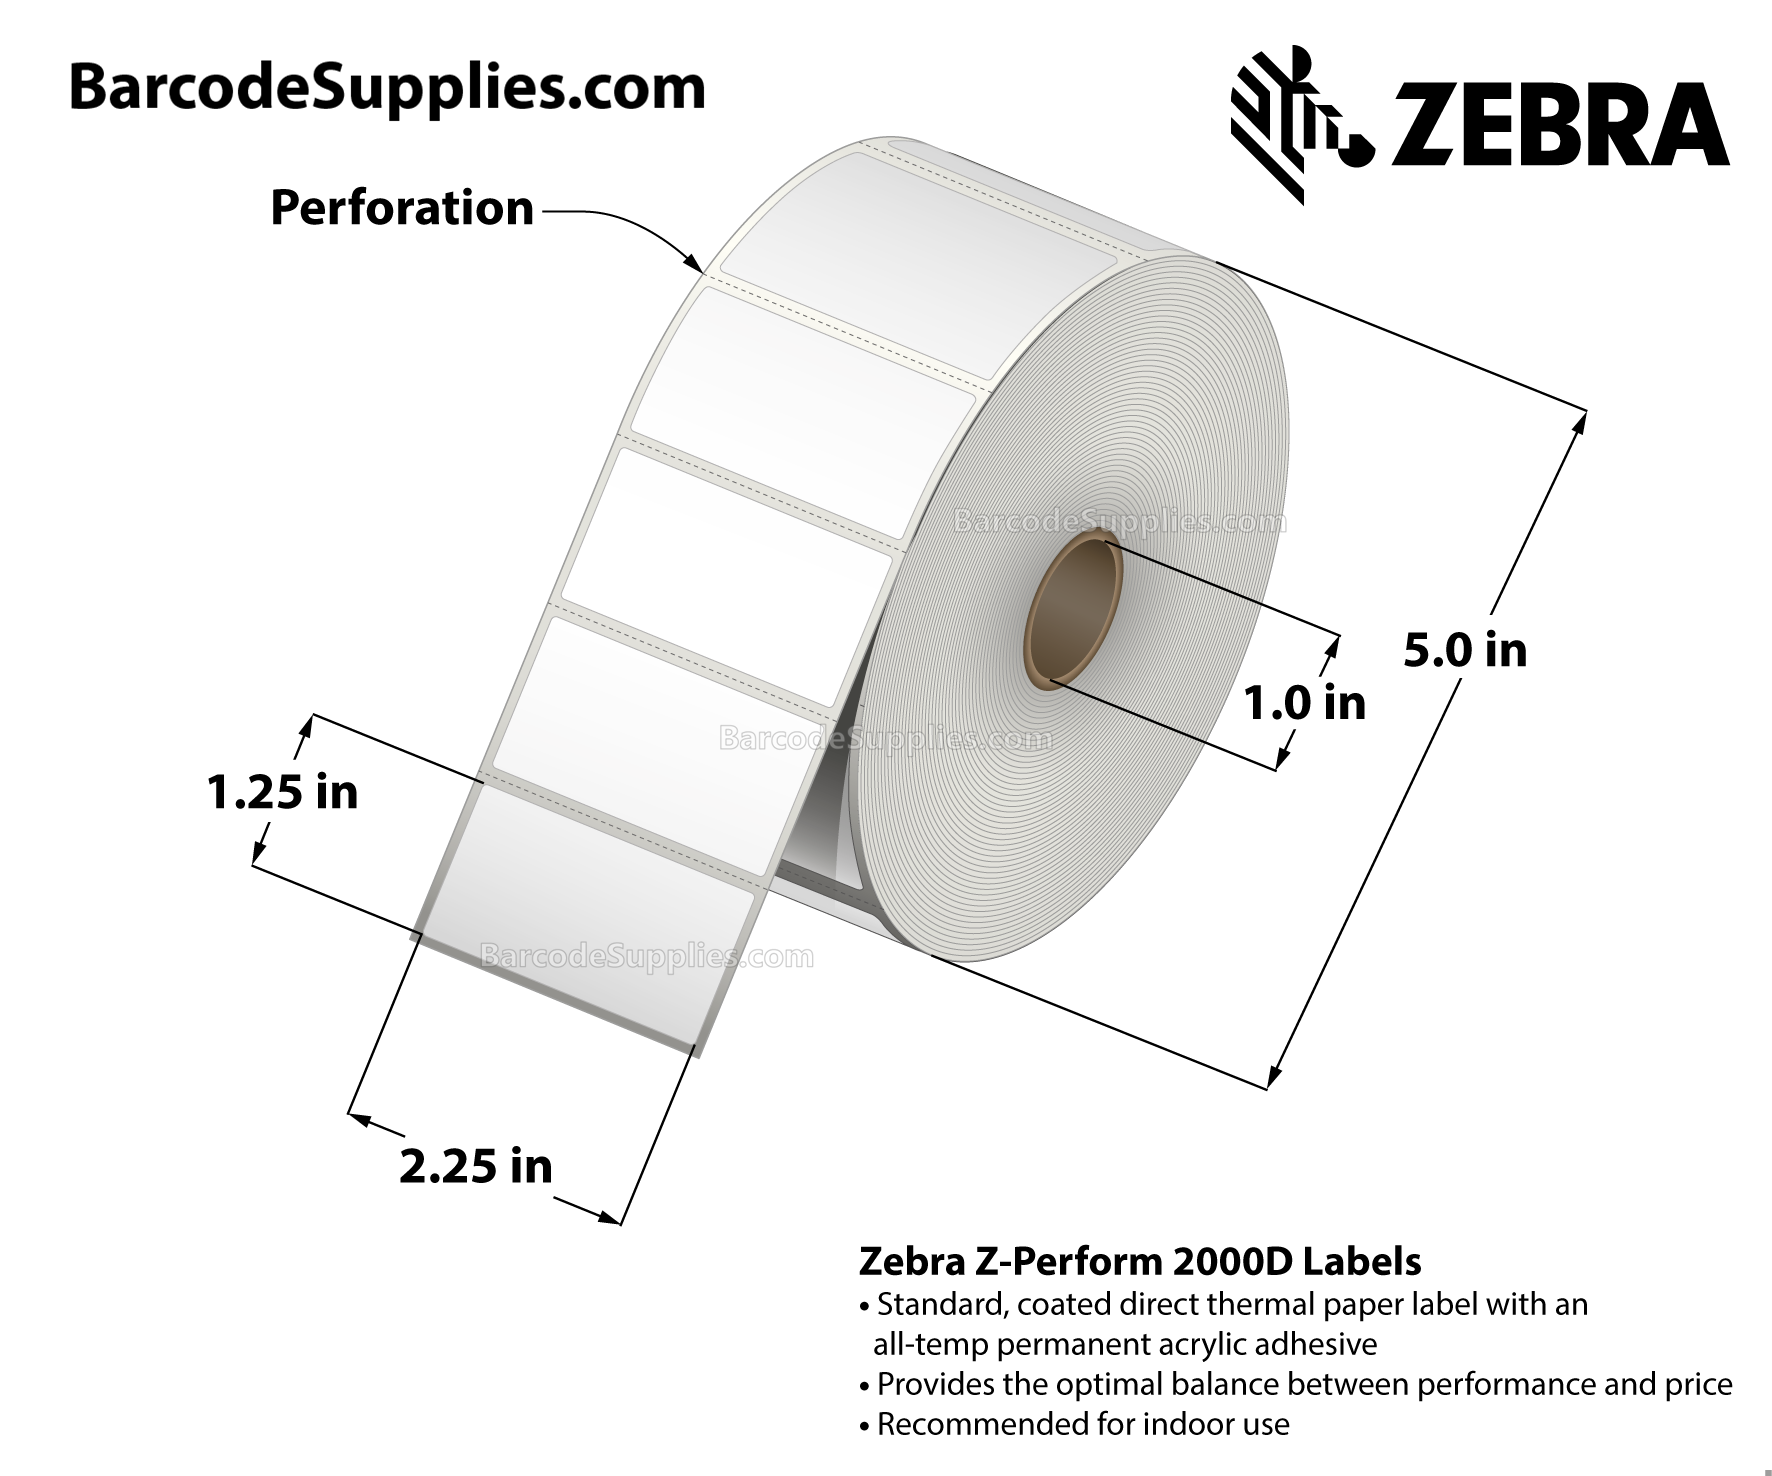 2.25 x 1.25 Direct Thermal White Z-Perform 2000D Labels With All-Temp Adhesive - Perforated - 2100 Labels Per Roll - Carton Of 12 Rolls - 25200 Labels Total - MPN: 10015781